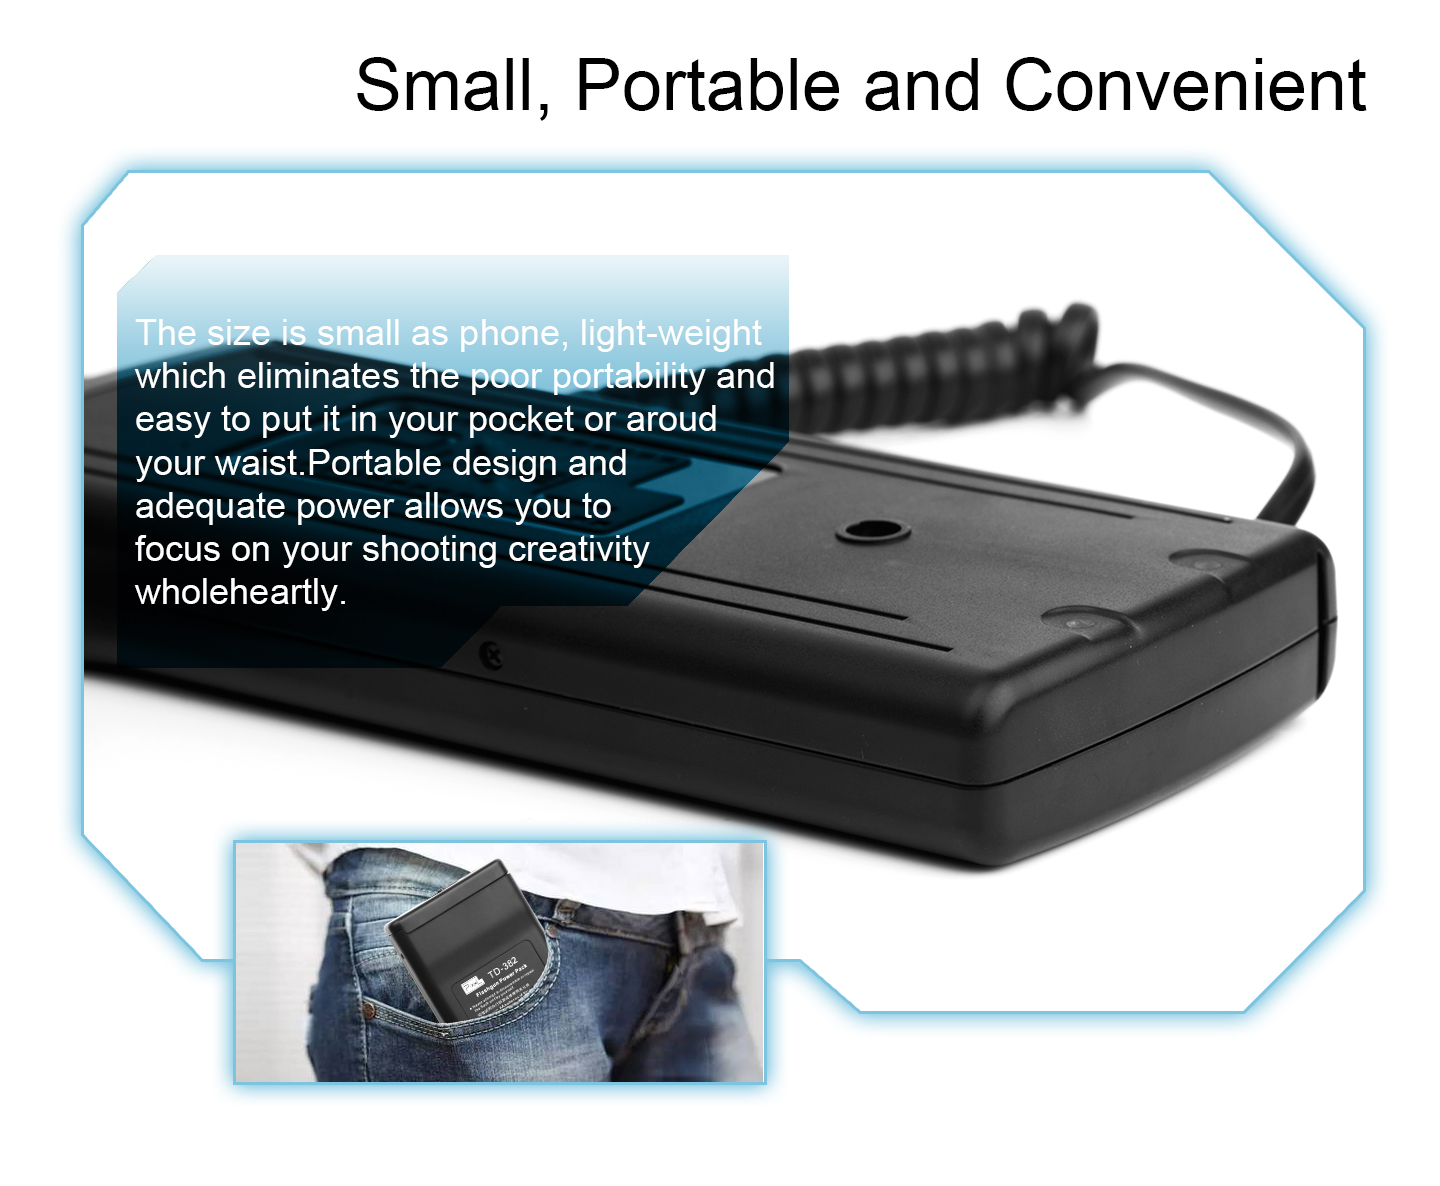 Small, Portable and Convenient